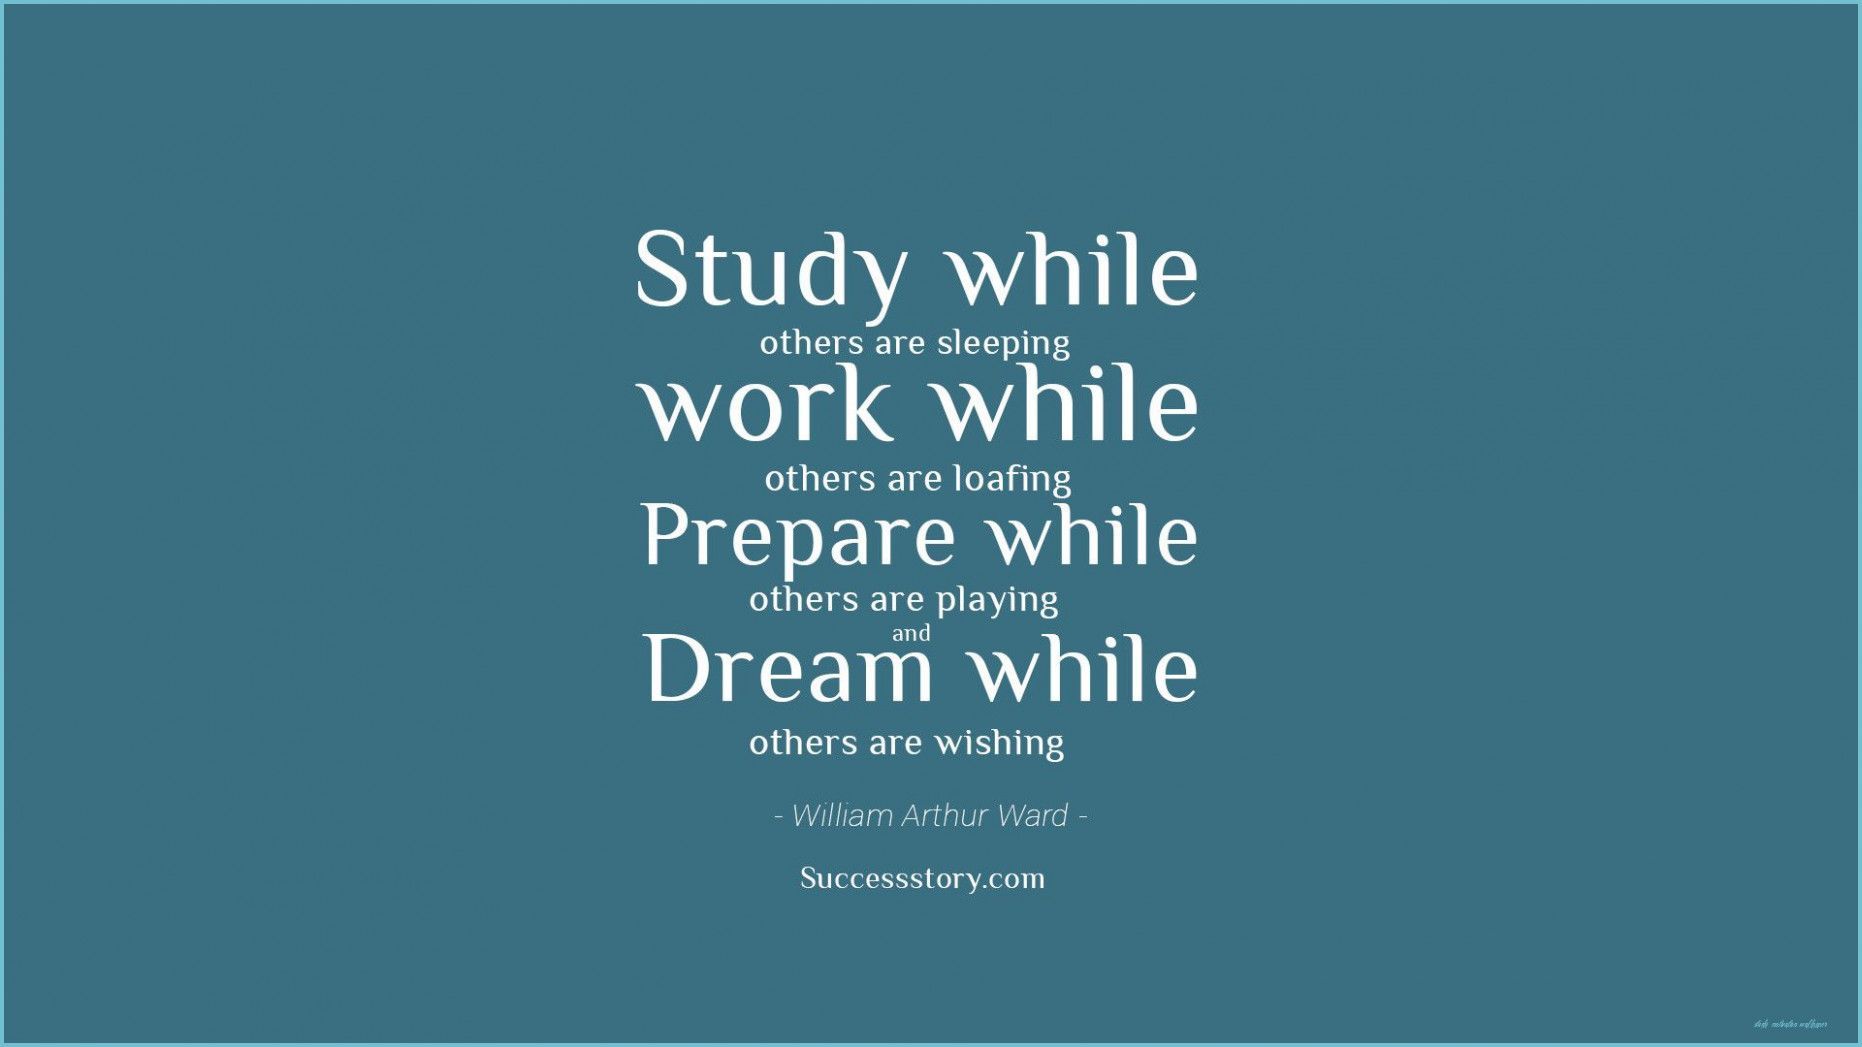 A quote that says study while work - Study